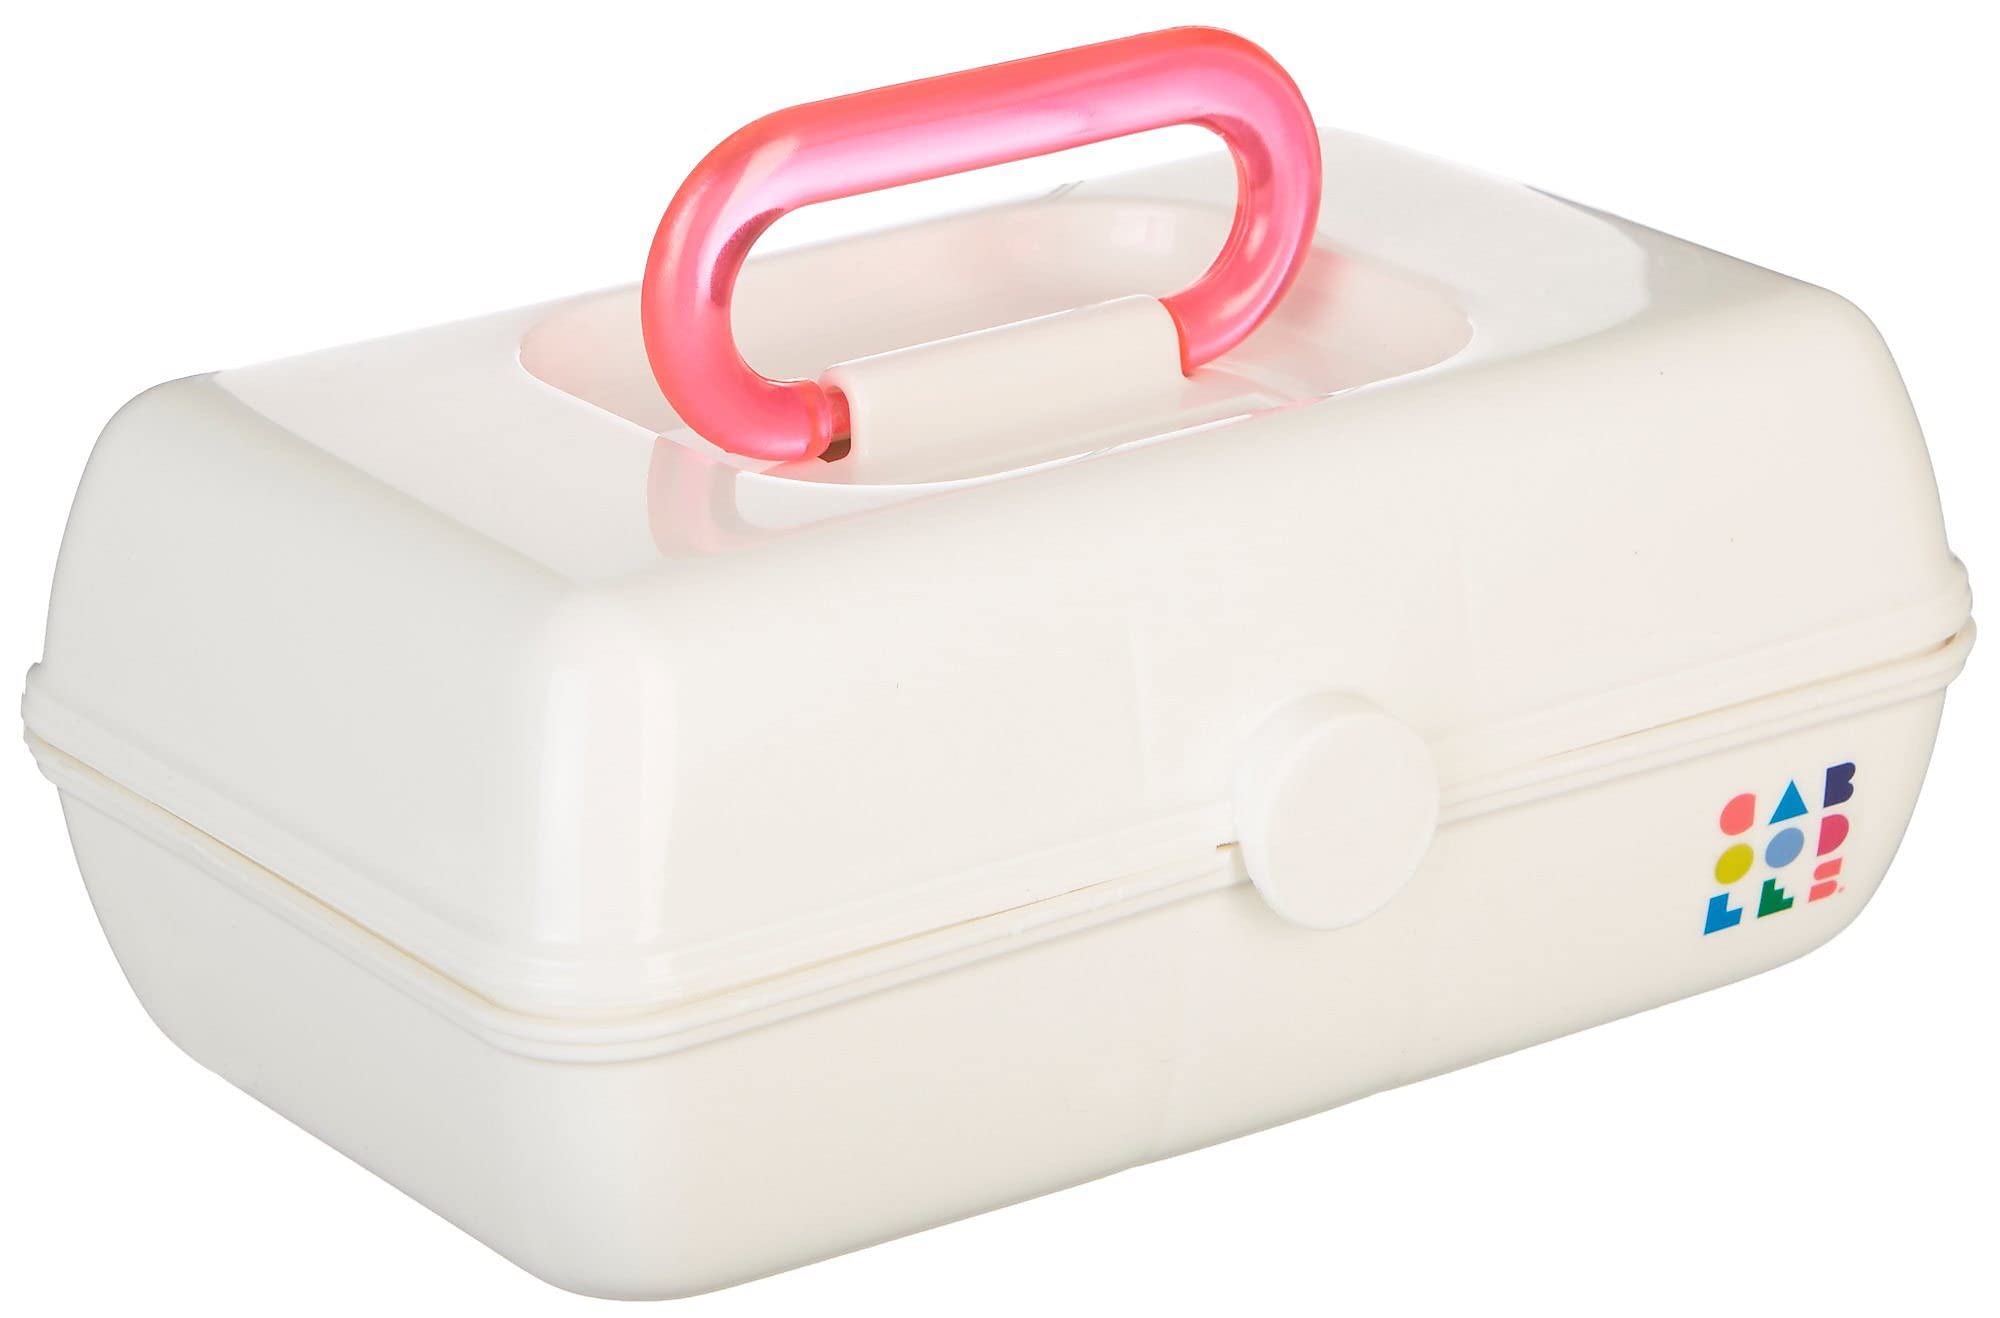 Caboodles Women's Make-up Case, White